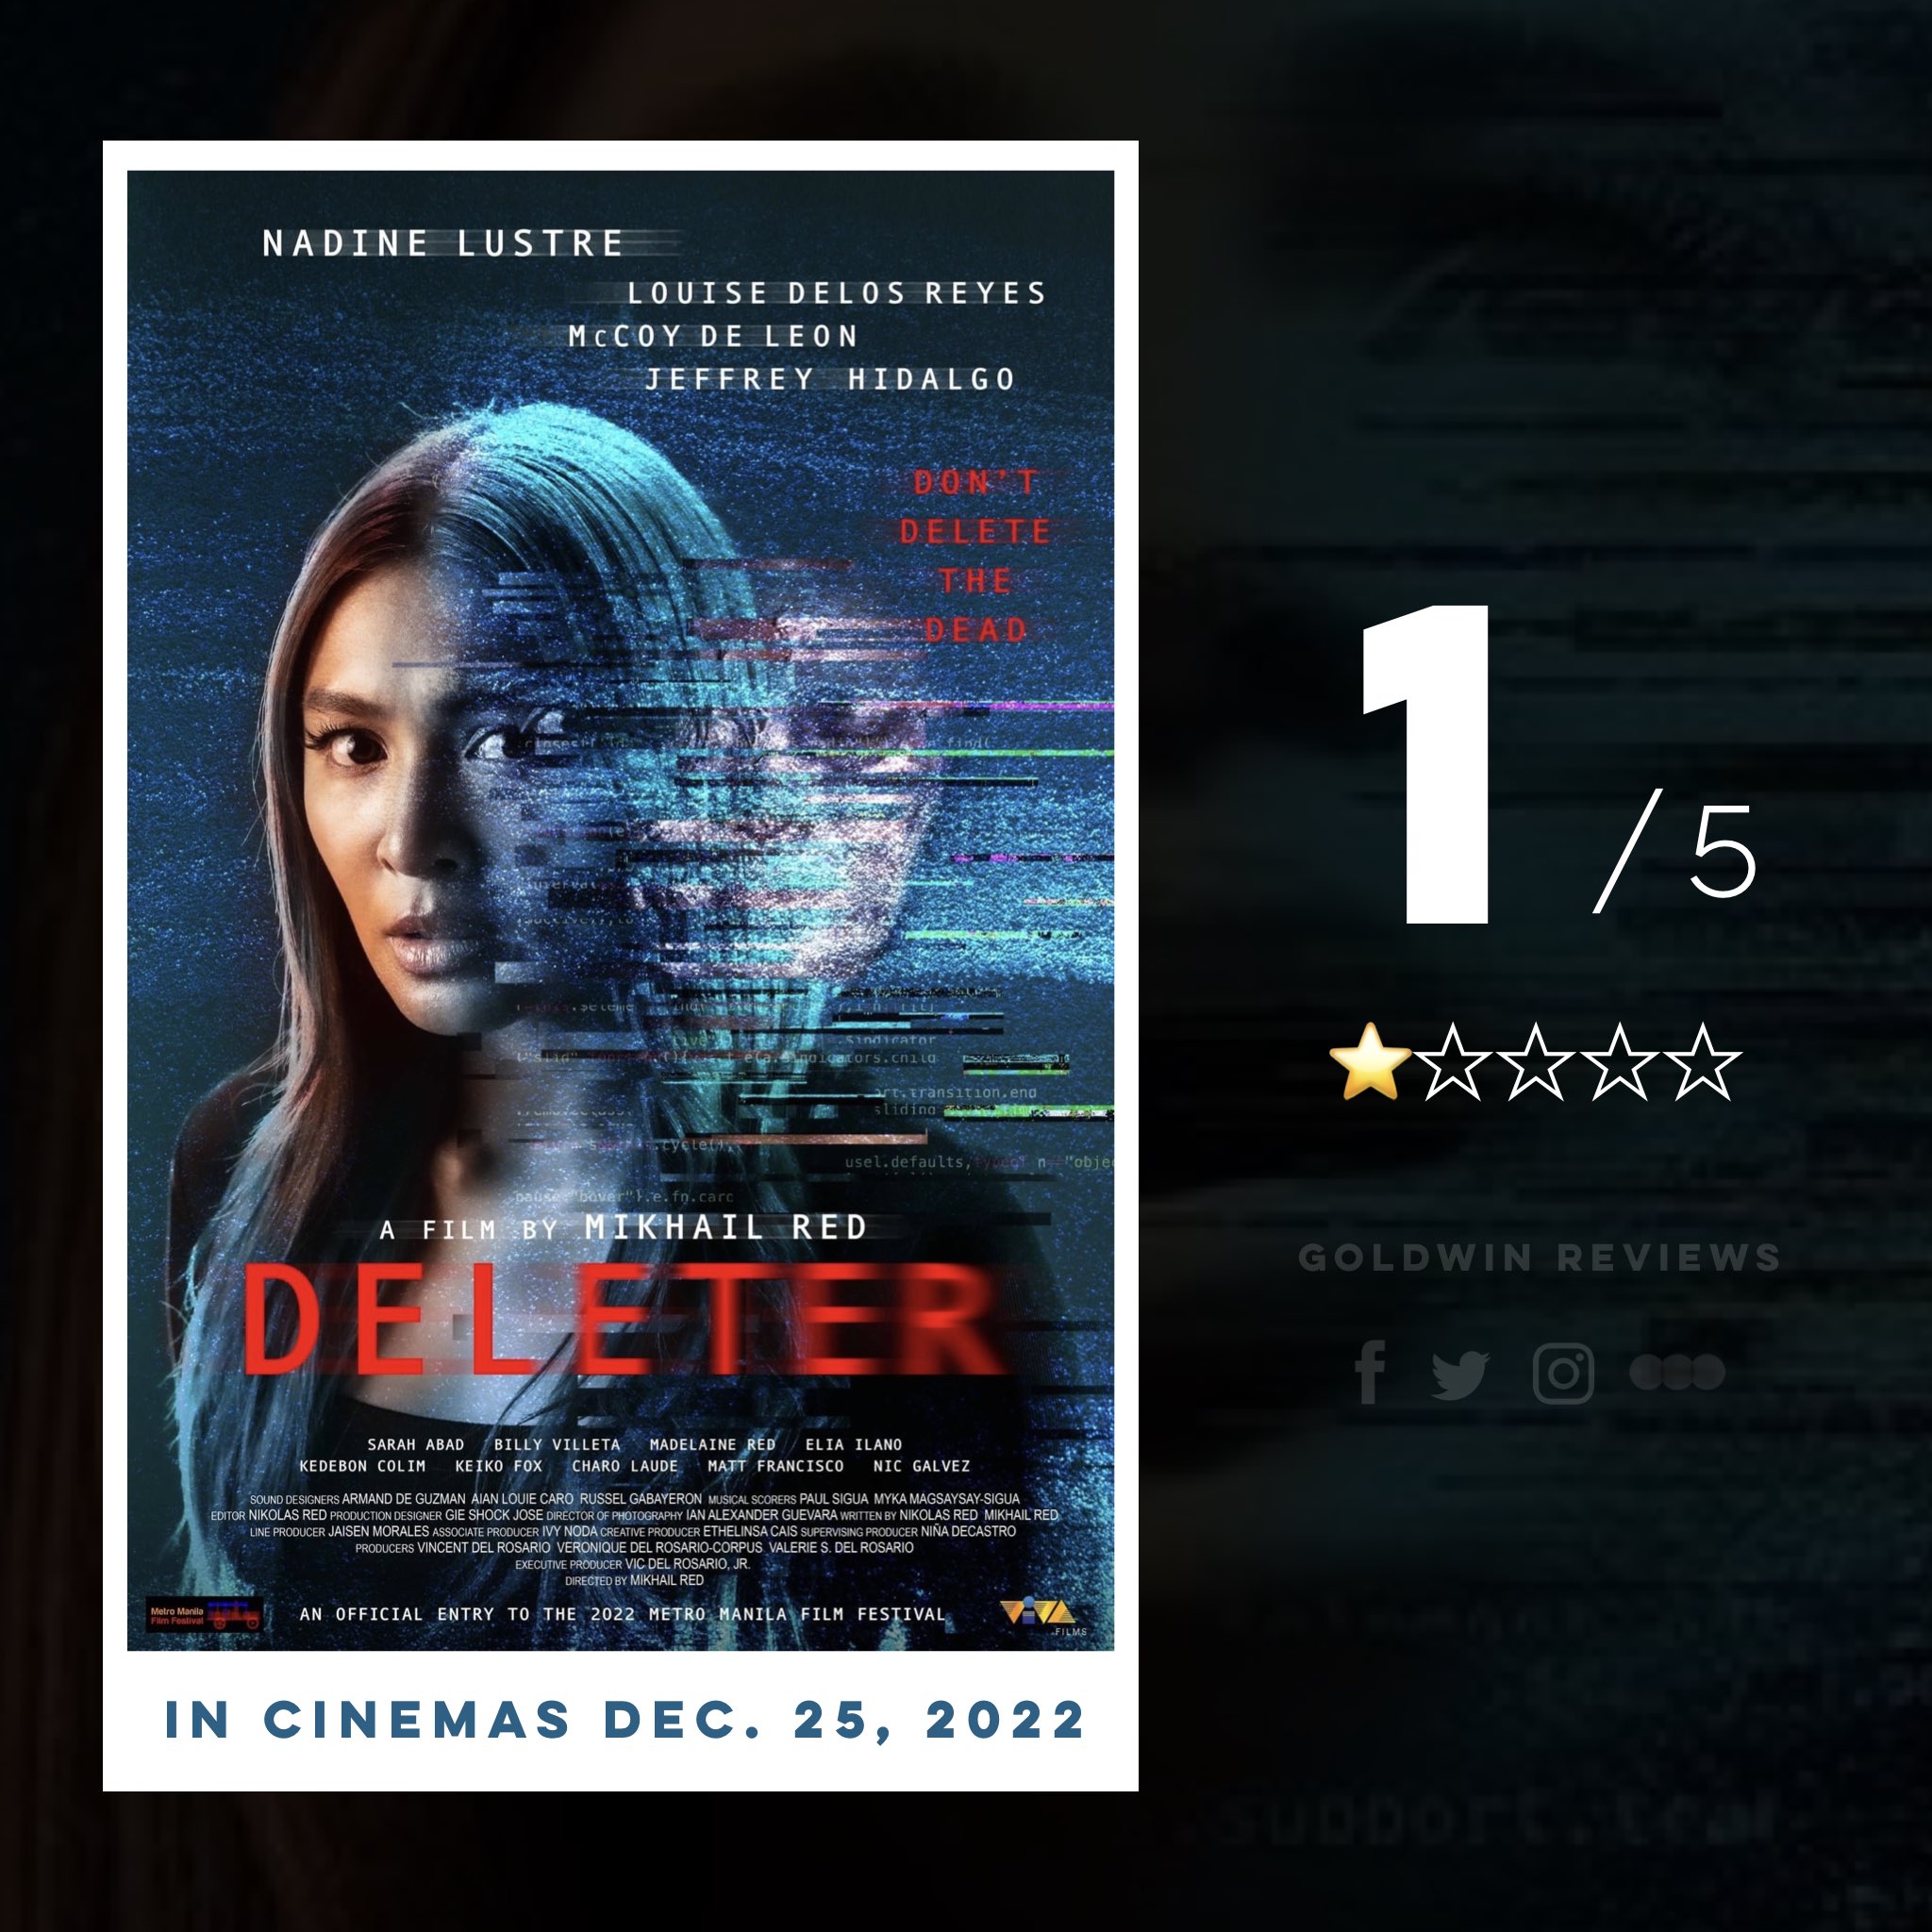 GoldwinReviews on X: Deleter (MMFF 2022) Directed by: Mikhail Red